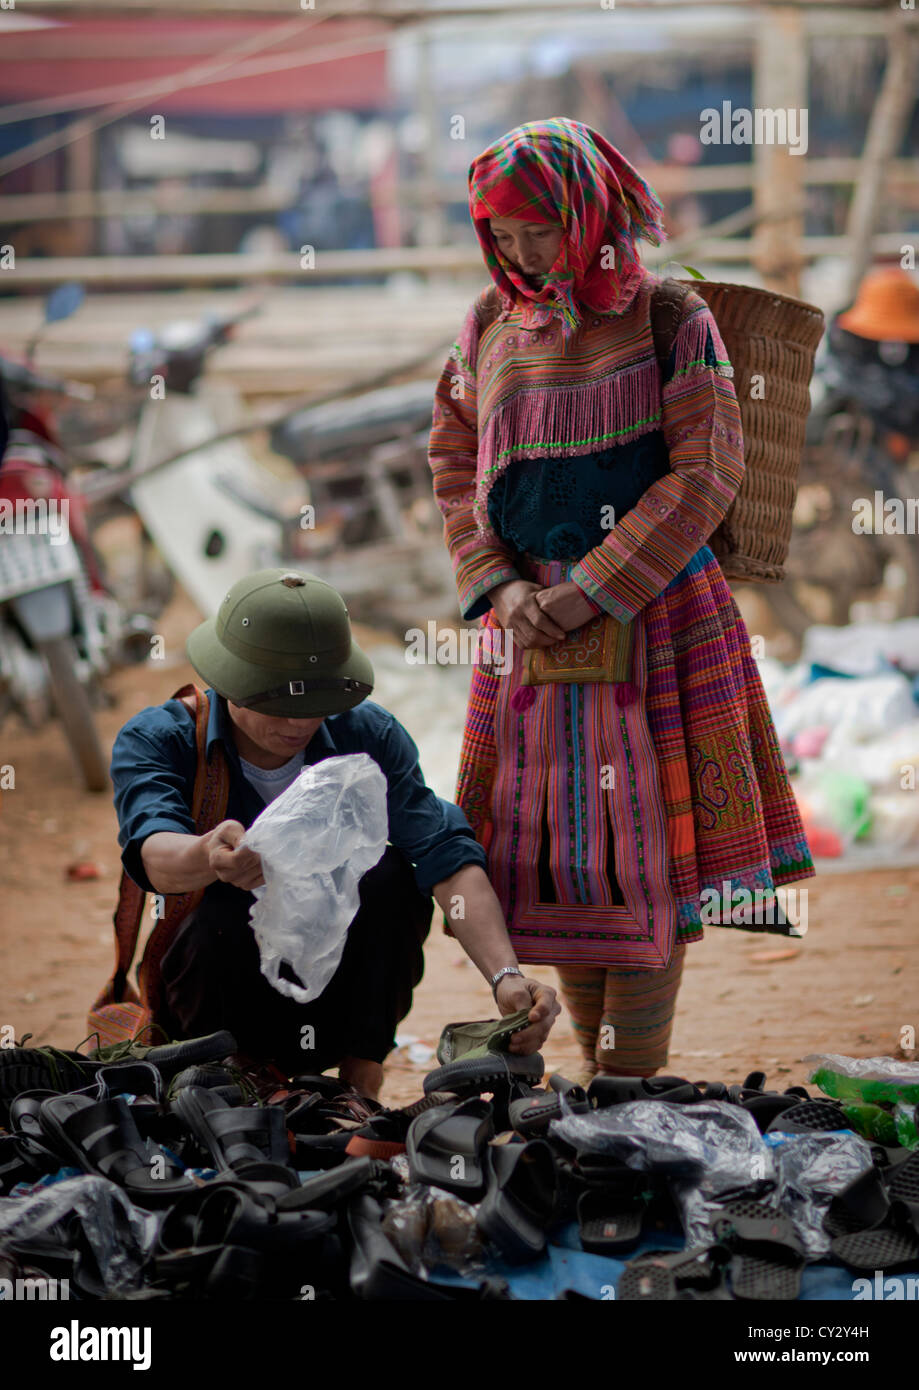 Flower Hmong Woman Looking For Shoes, Sapa Market, Vietnam Stock Photo